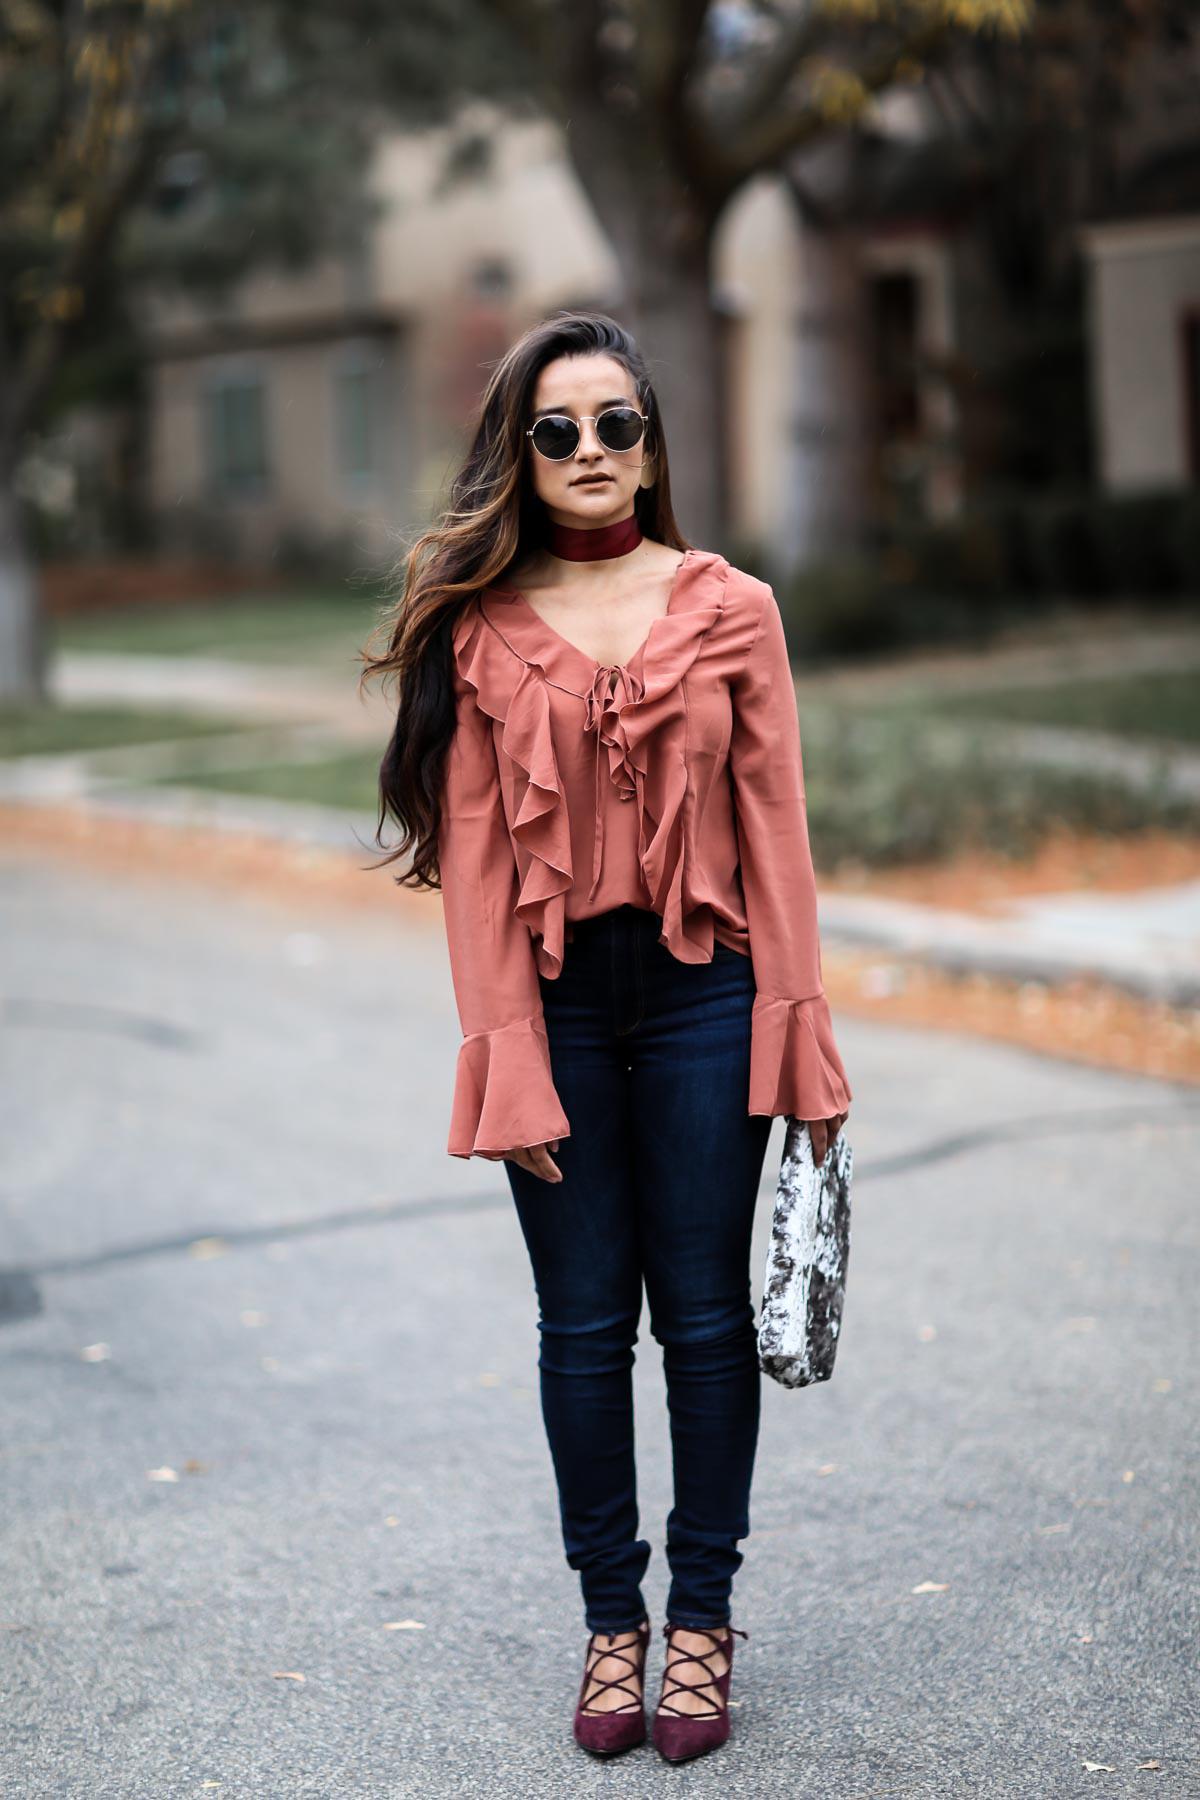 stiletto-confessions-forever21-ruffle-blouse-62